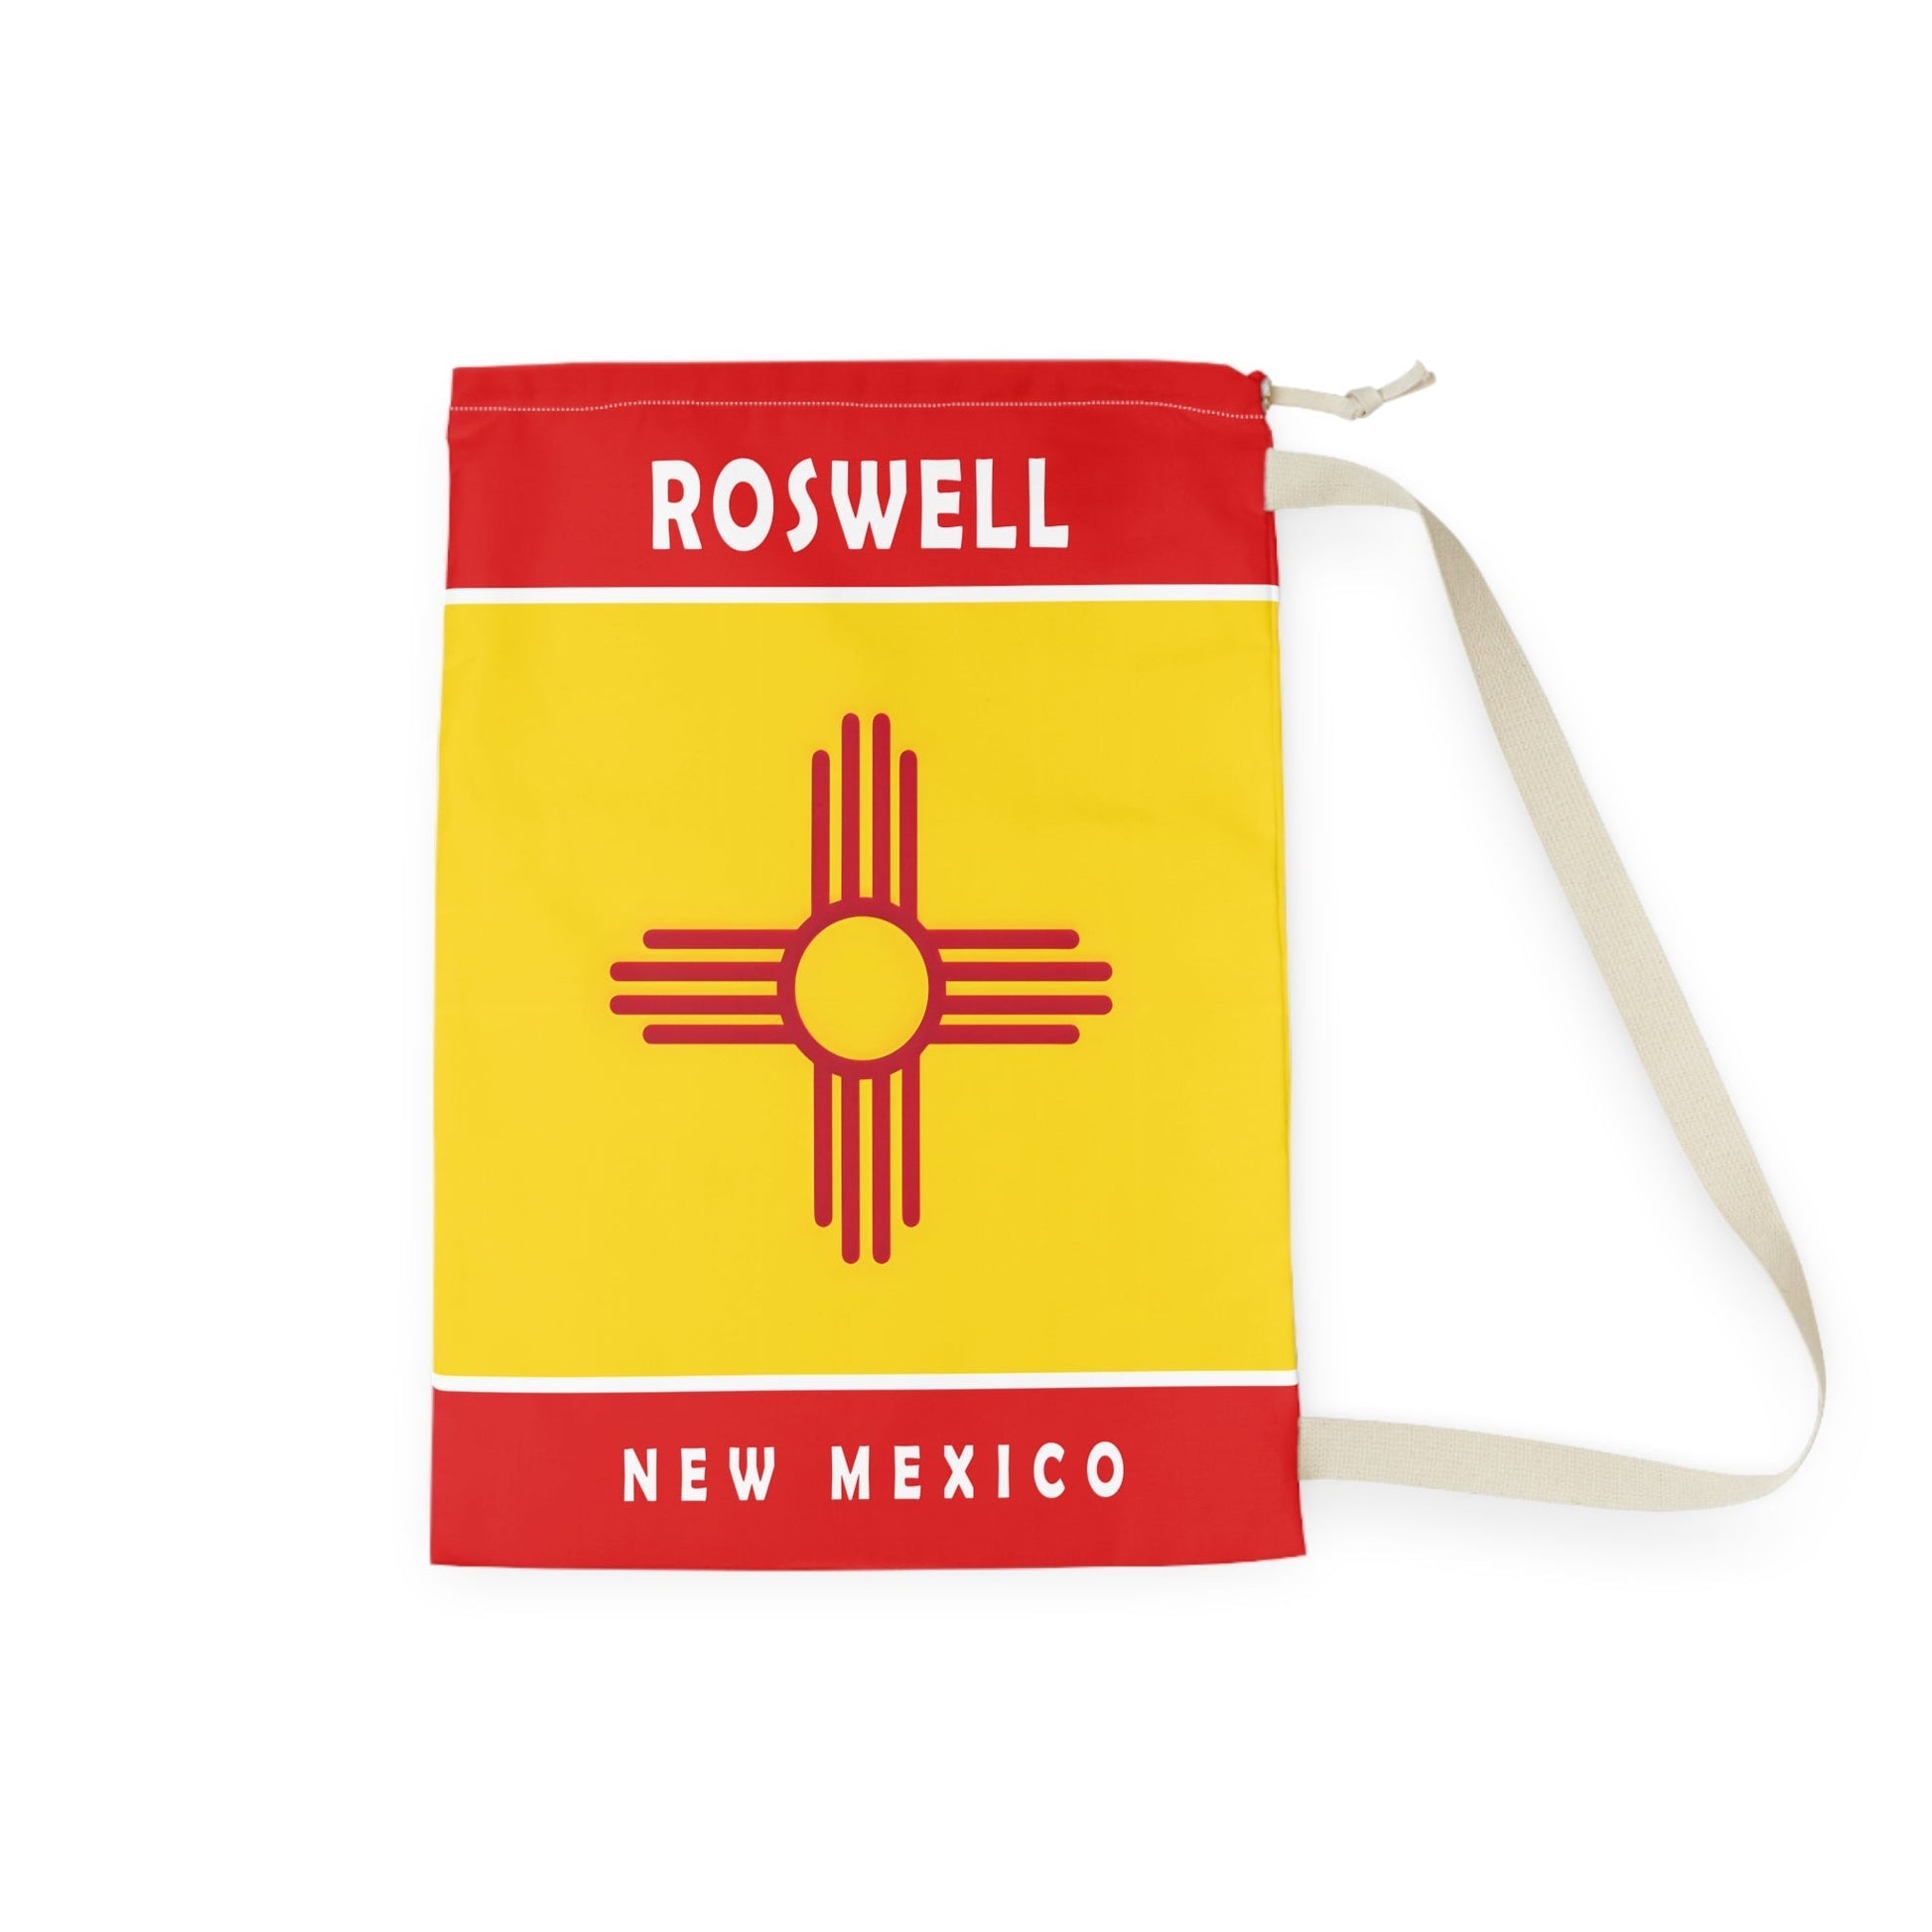 Roswell New Mexico Laundry Bag